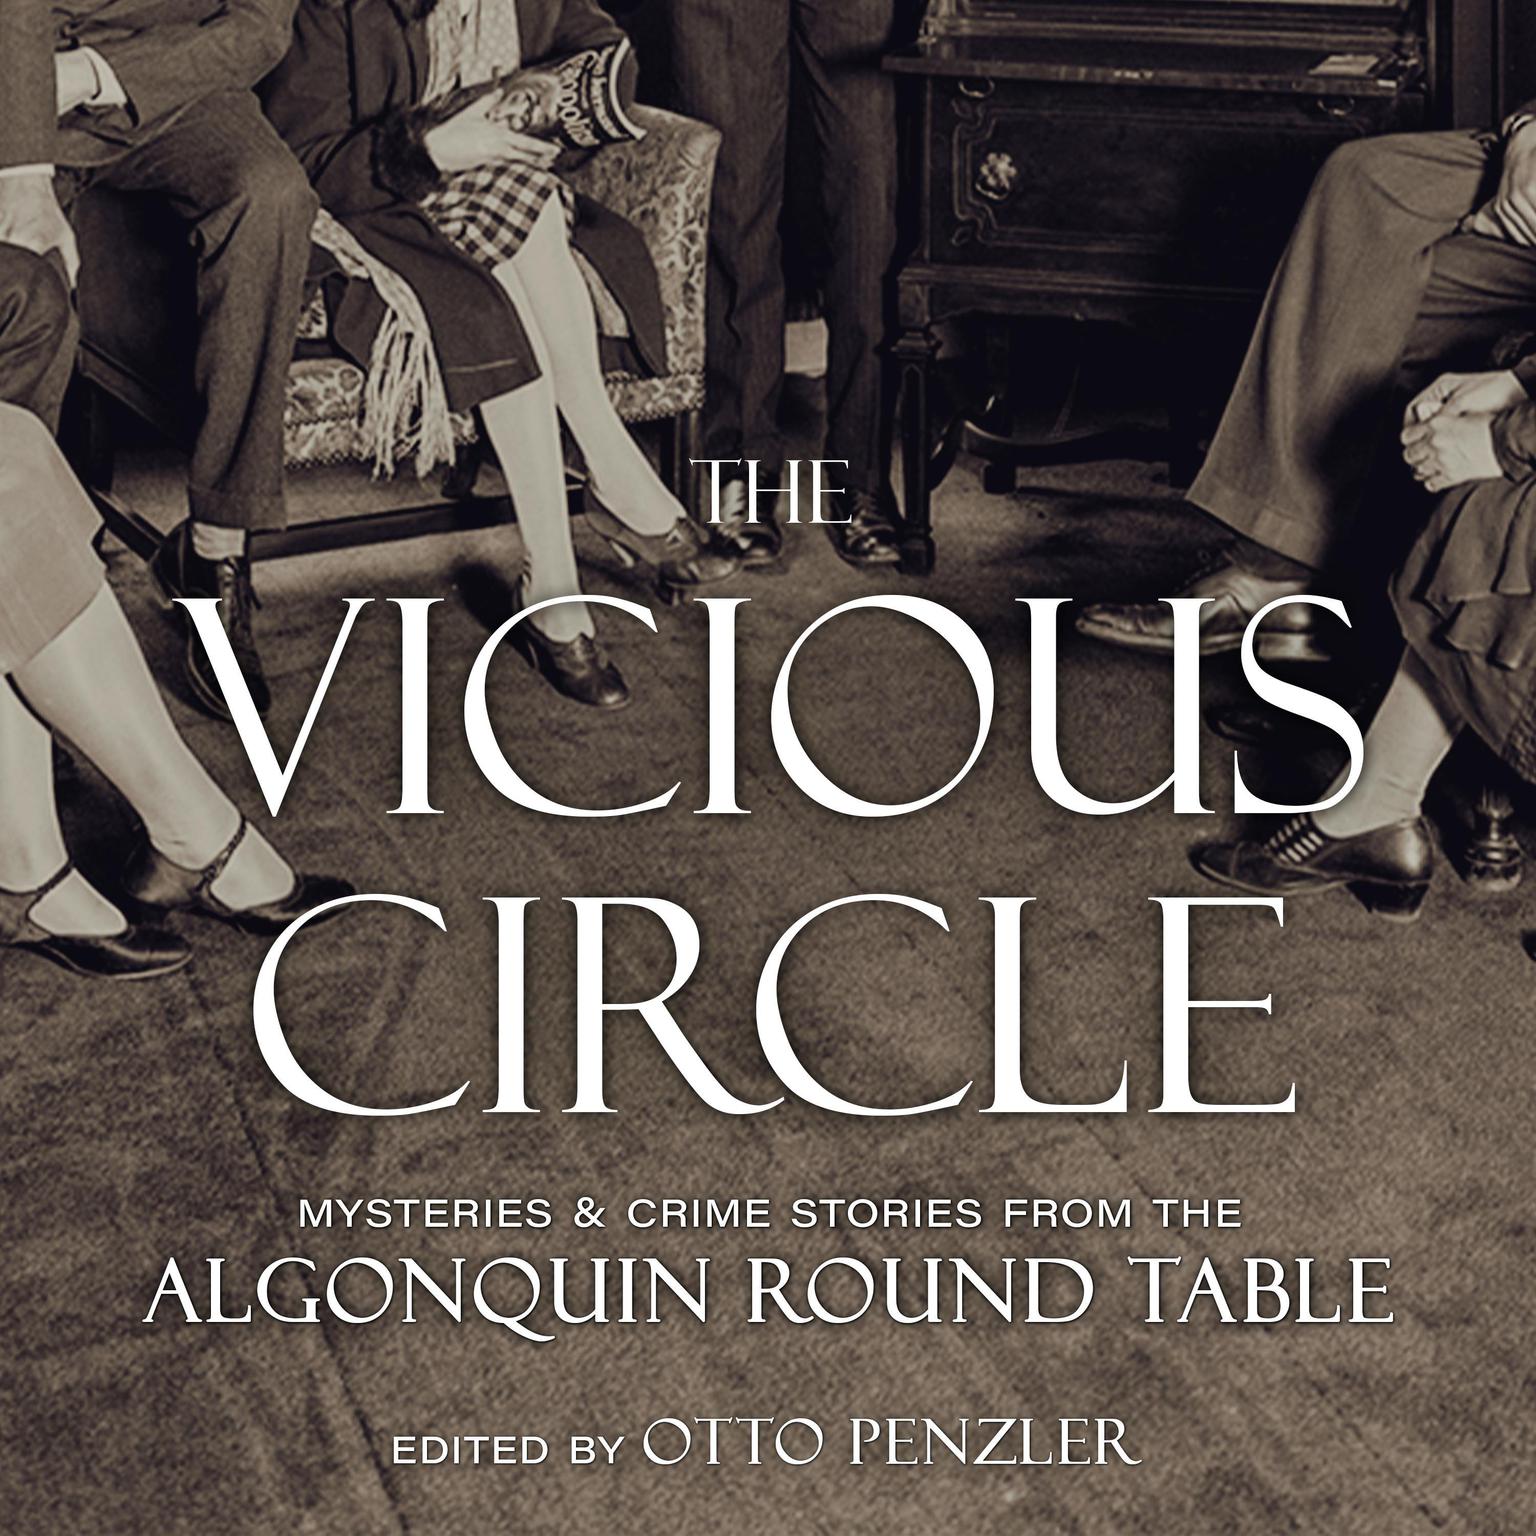 The Vicious Circle: Mysteries & Crime Stories from the Algonquin Round Table Audiobook, by Otto Penzler